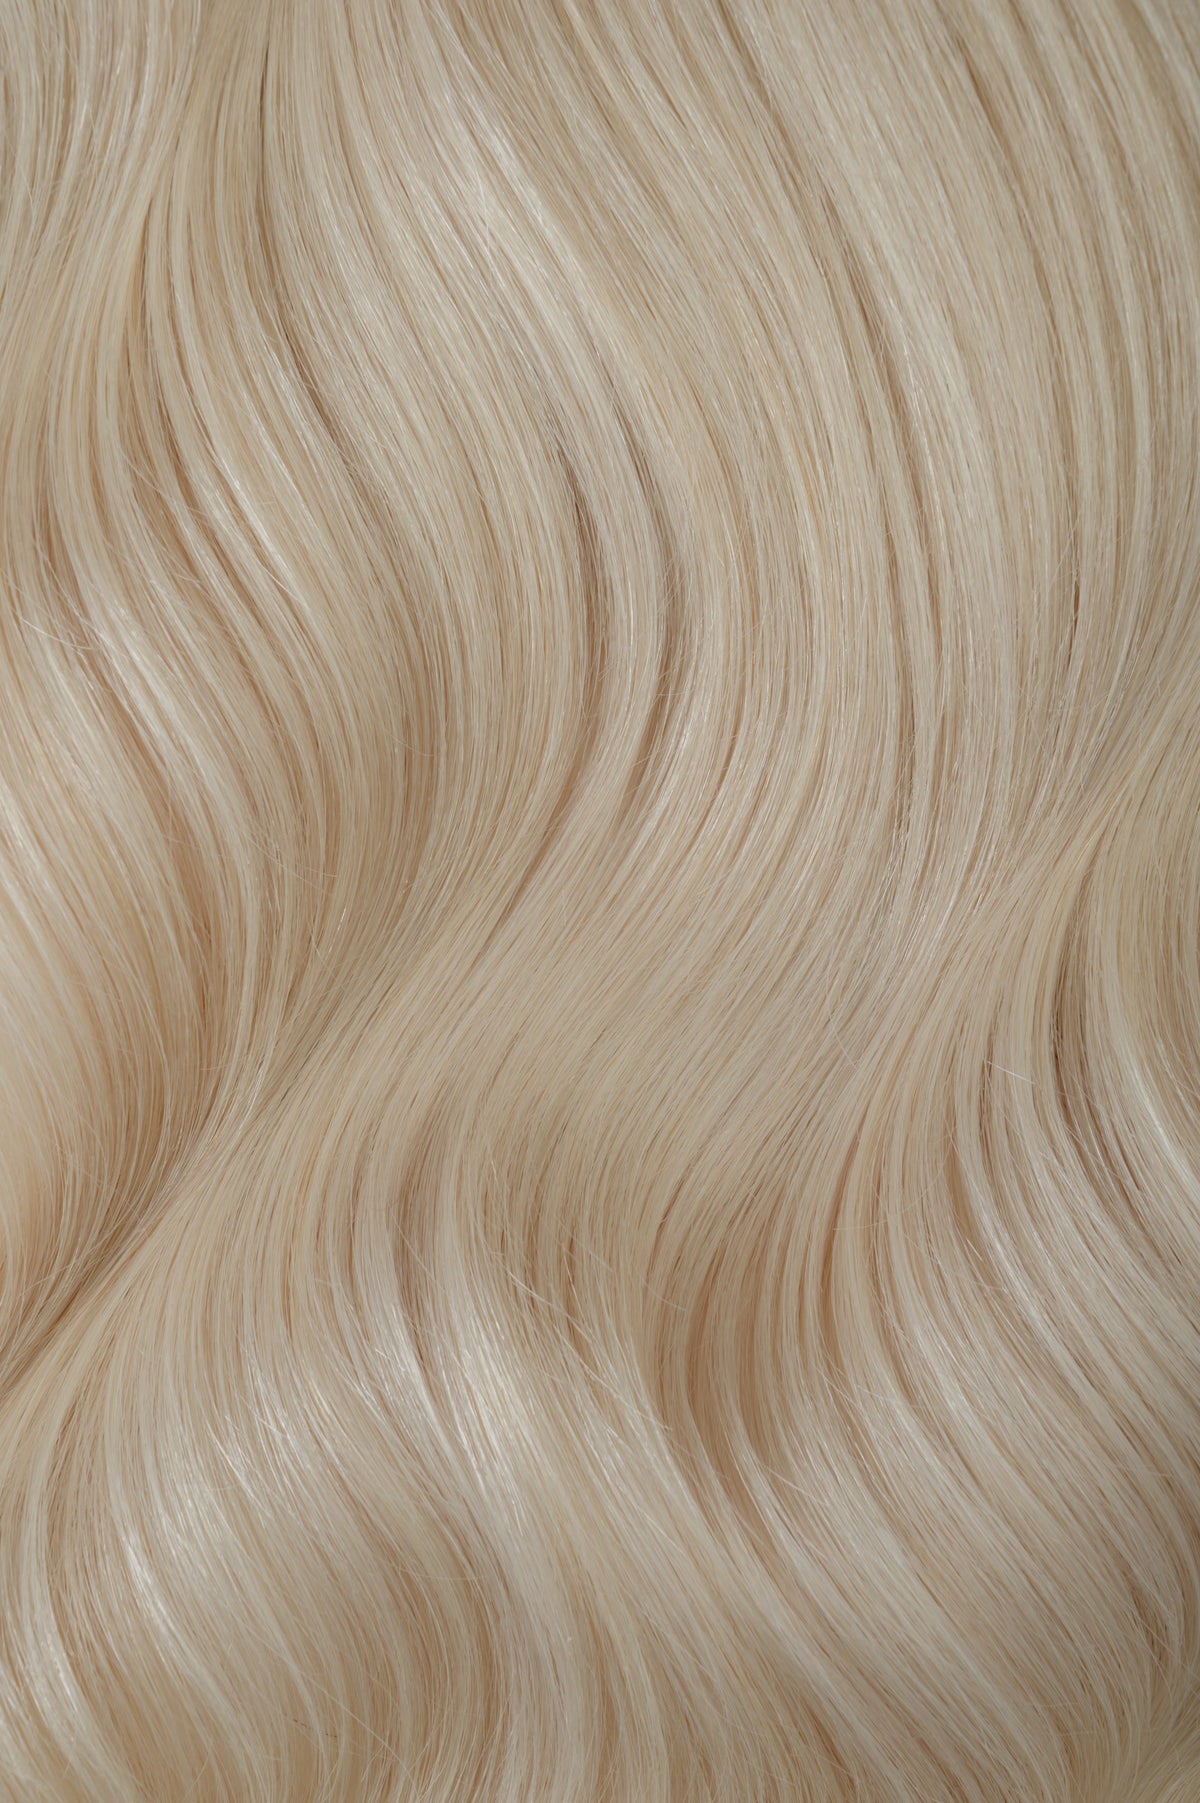 #60 Whitest Ash Blonde Traditional Weft Extensions